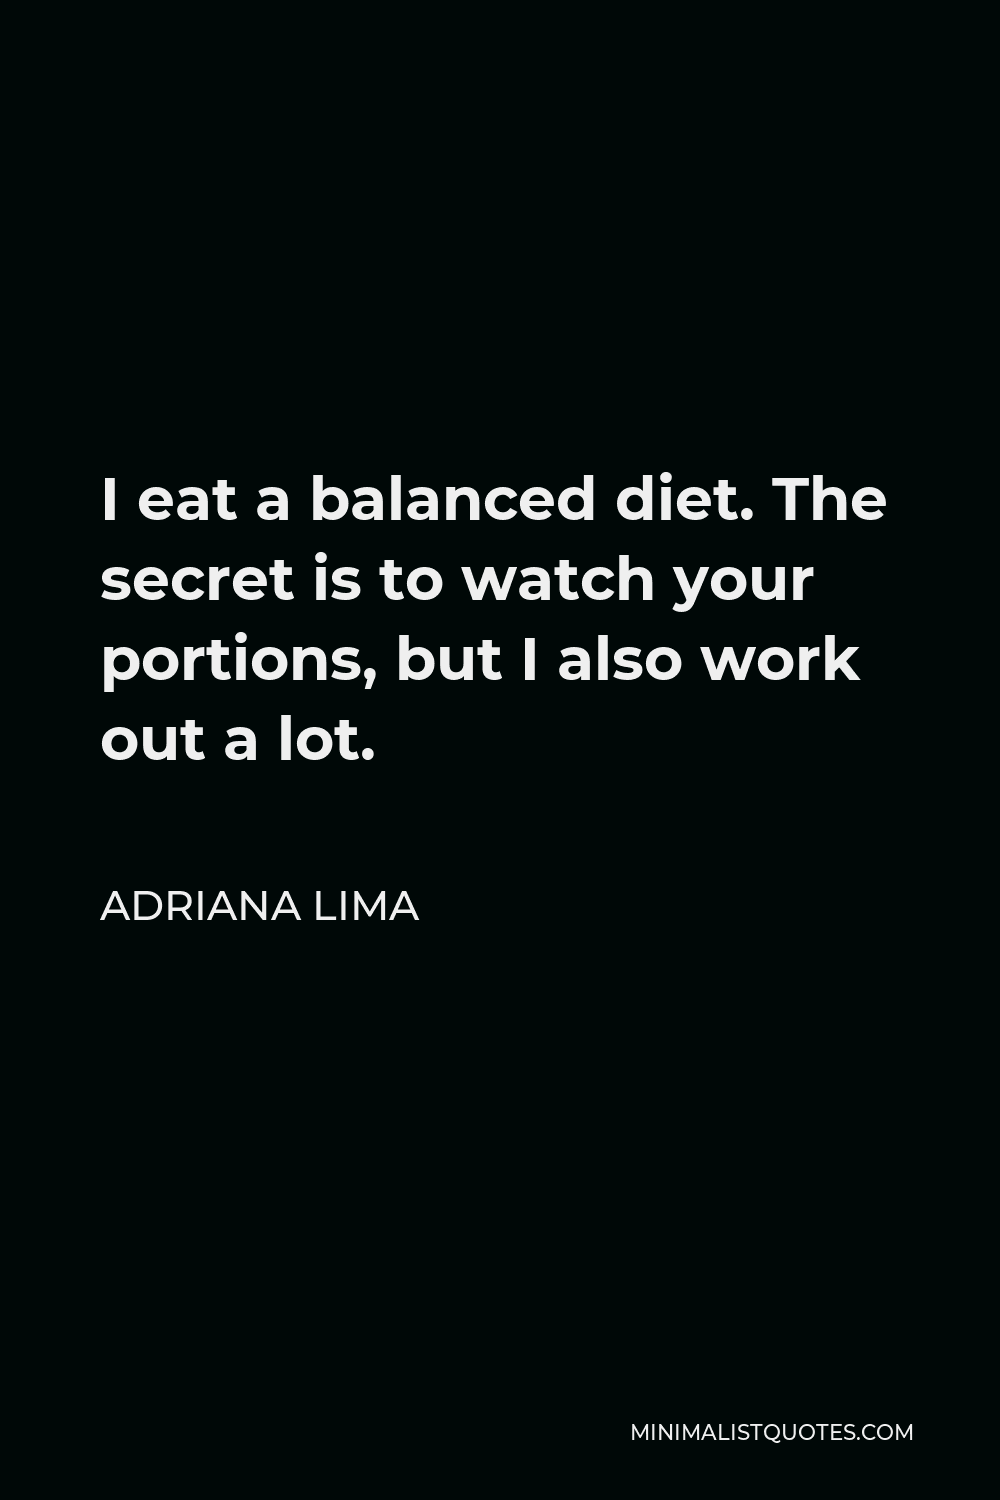 Adriana Lima Quote - I eat a balanced diet. The secret is to watch your portions, but I also work out a lot.